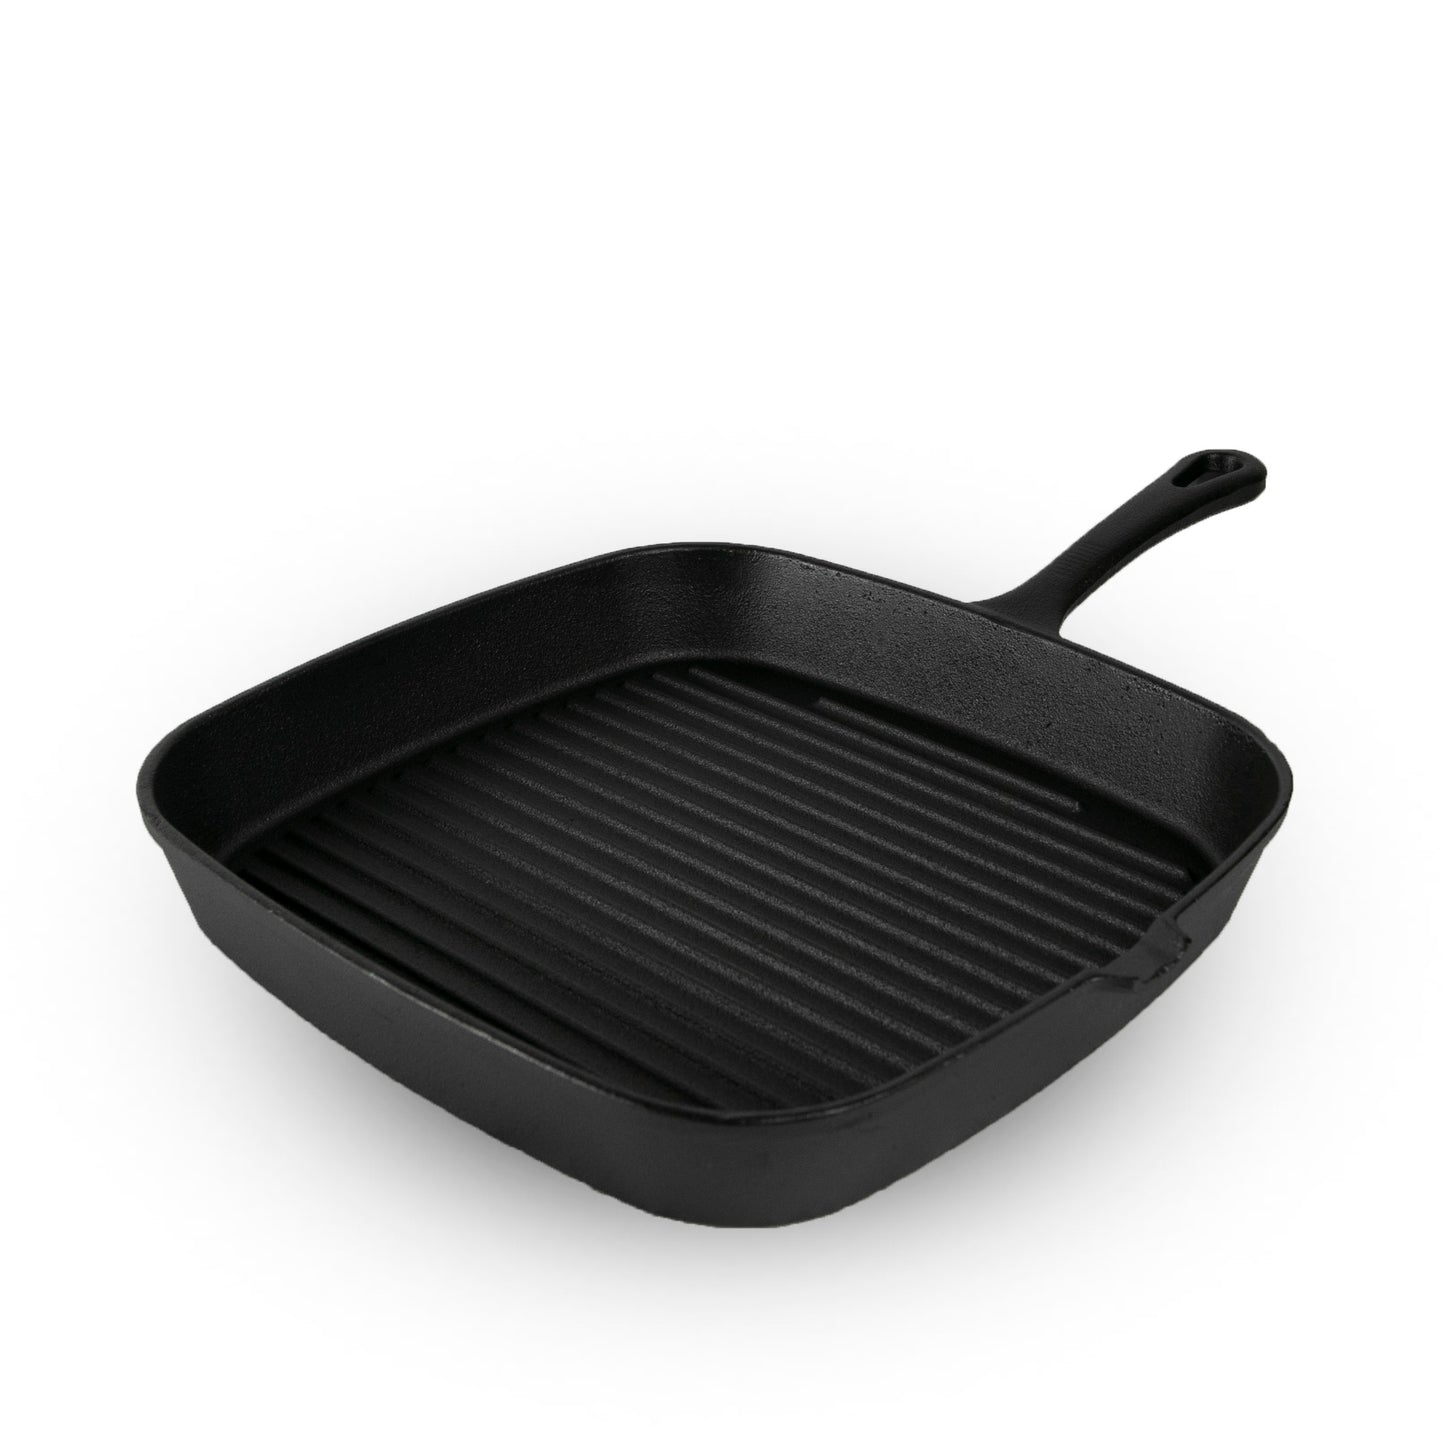 Pre-seasoned square grill pan with handle, 9.5"